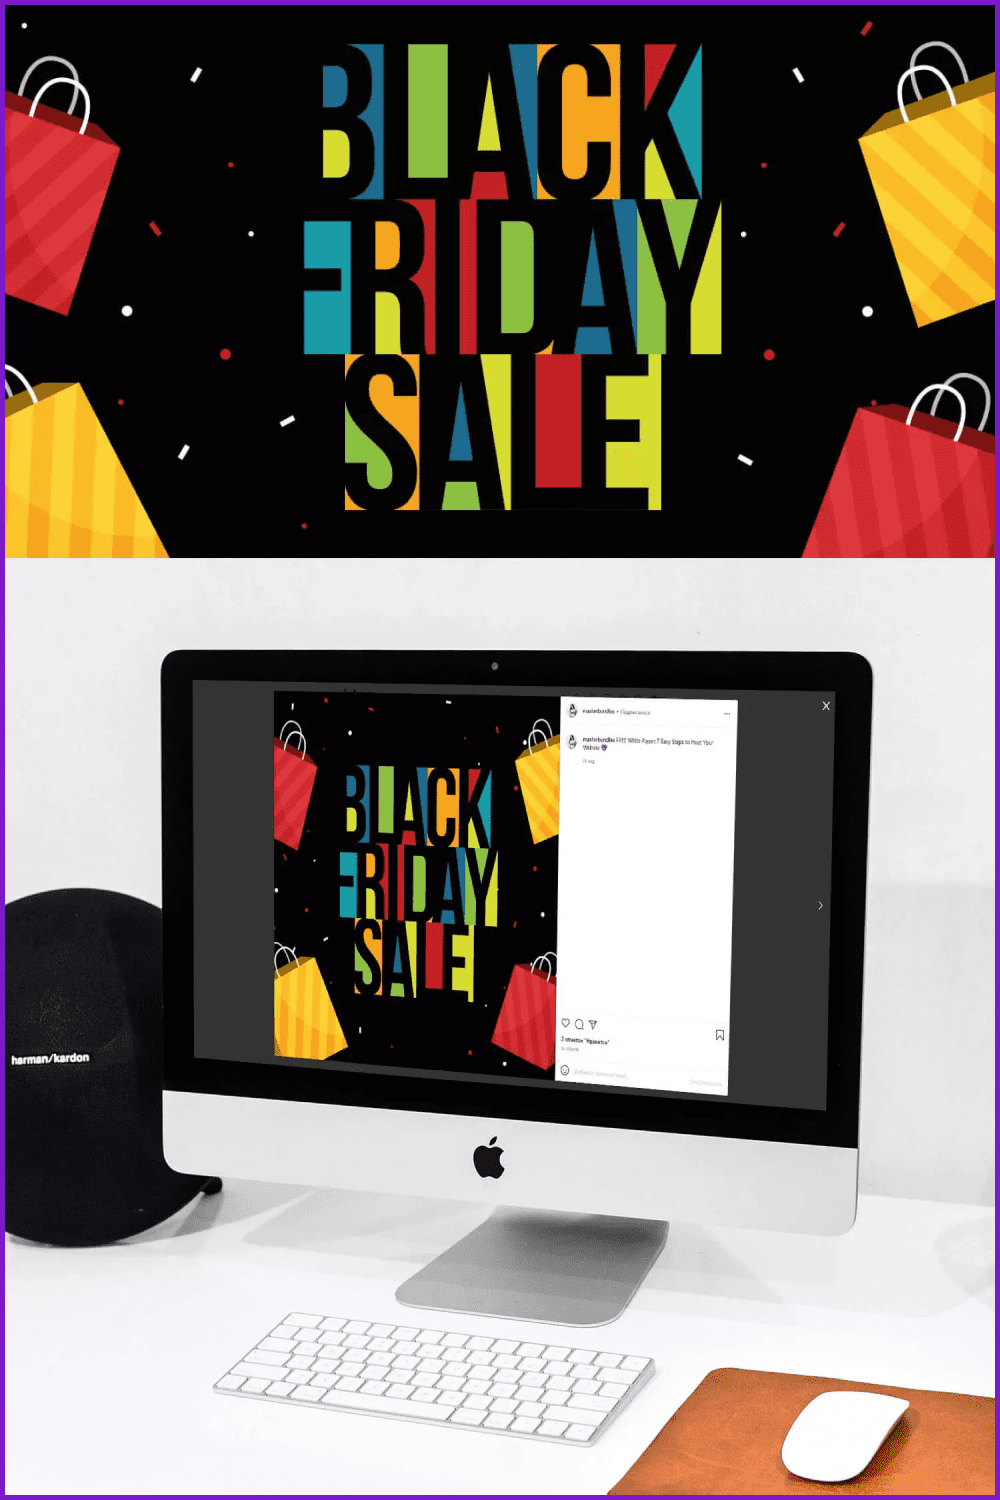 Poster for Black Friday with colorful letters on a black background.